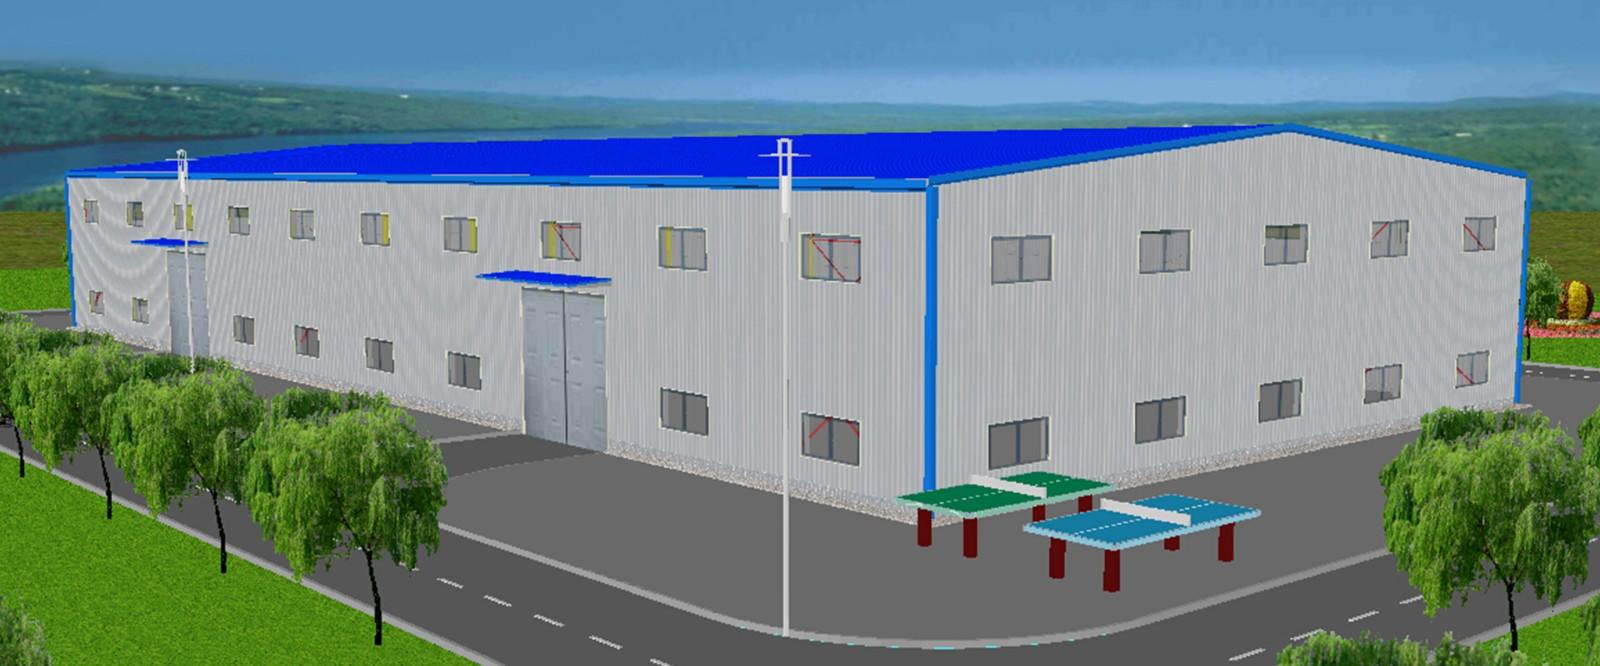 Warehouse for storing earthquake emergency items in Indonesia: 6 sets of 50*20*6m